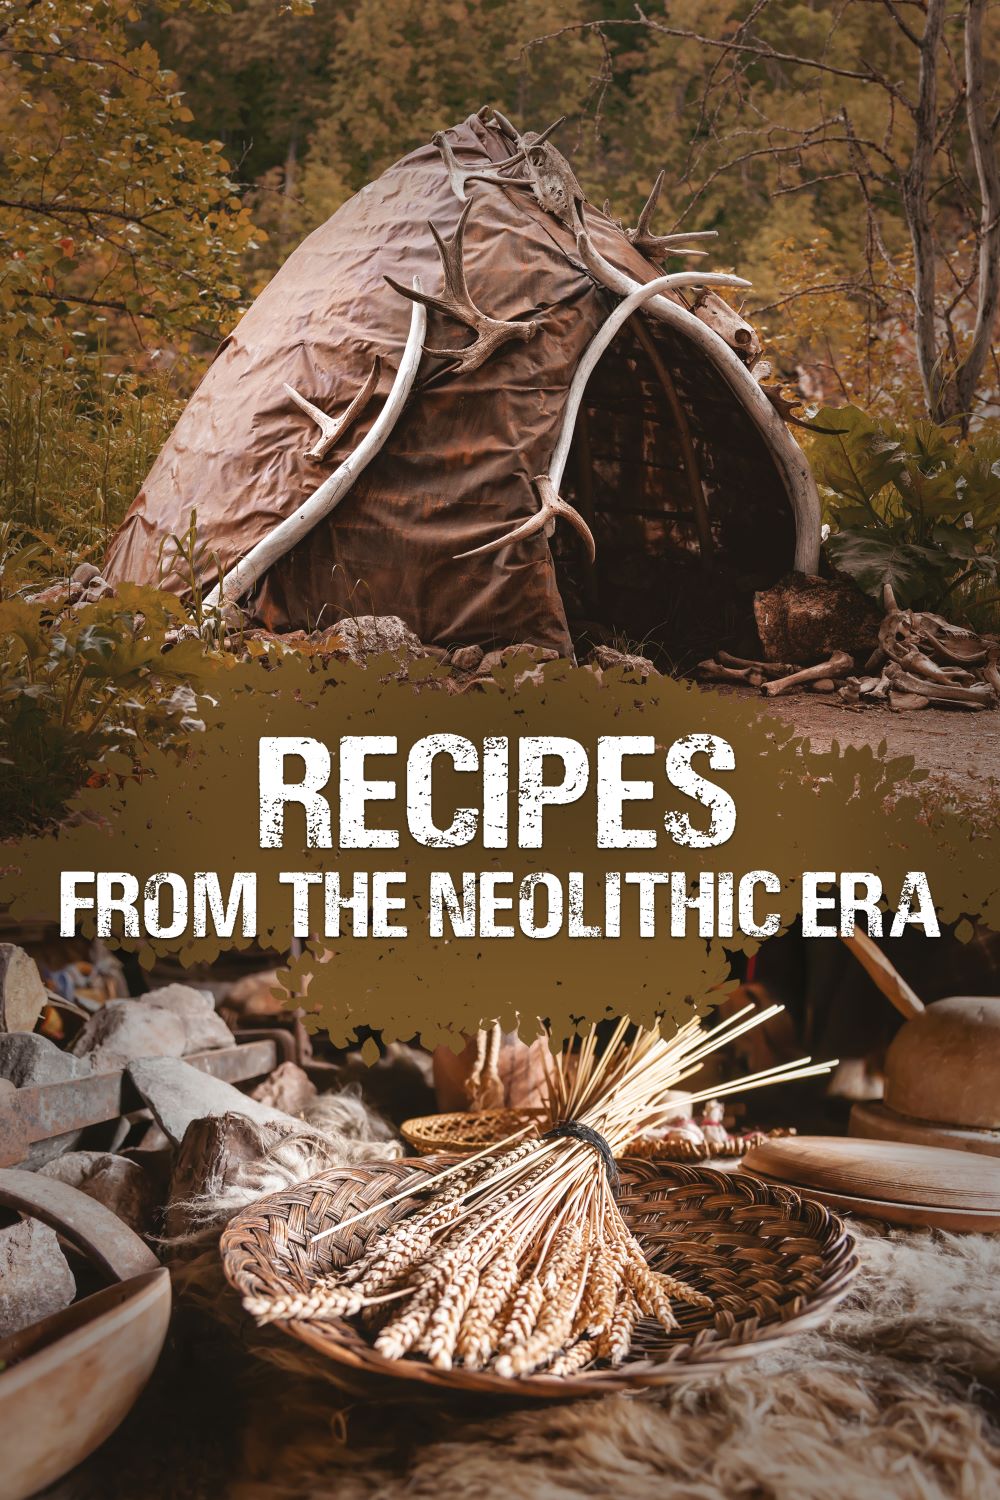 Recepies from the Neolythic Era